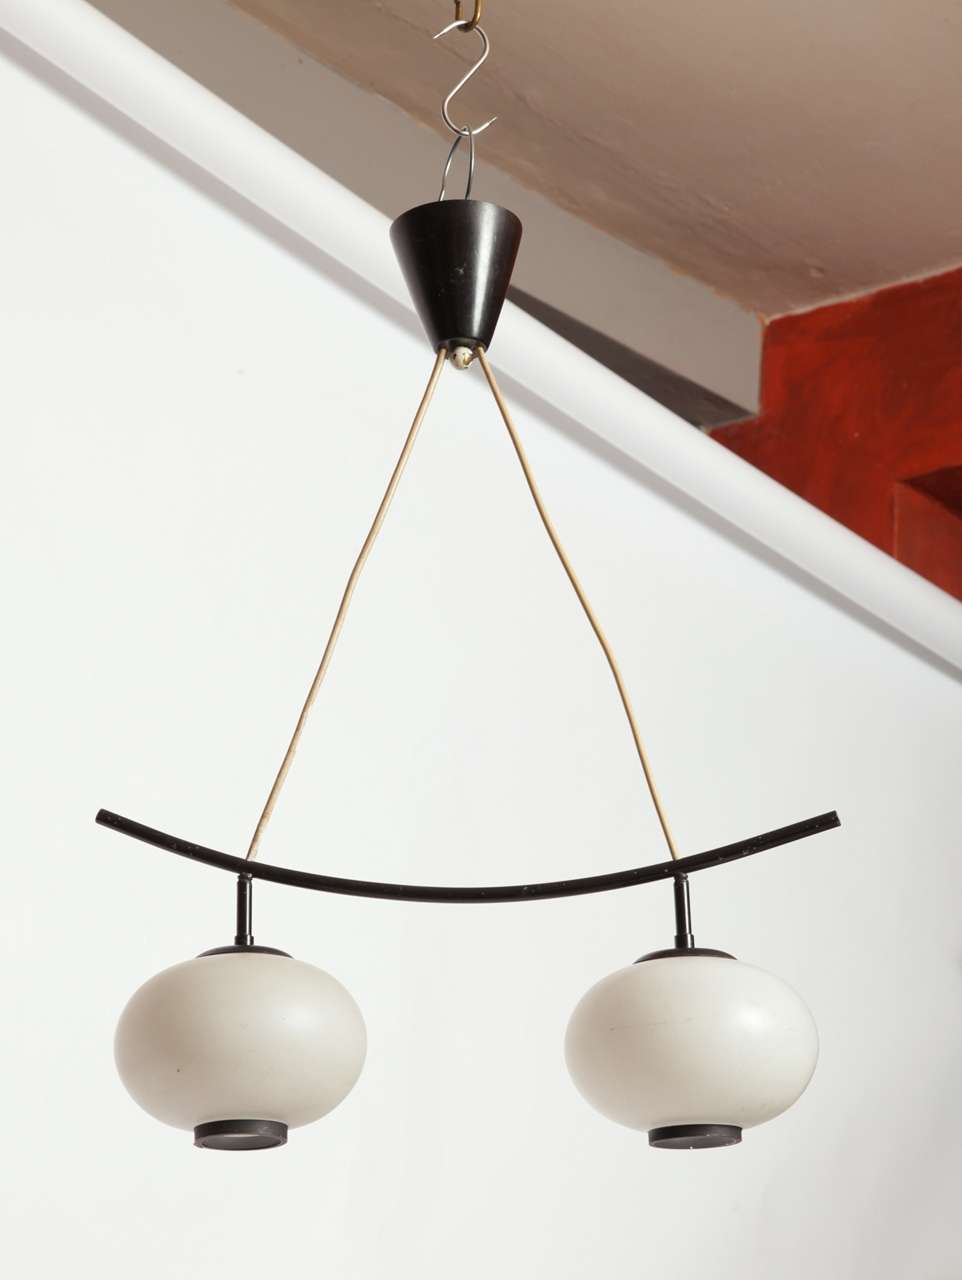 Opaline-glass fifties lamp, designed influenced by the Japonism, frame of metal and black lacquered.